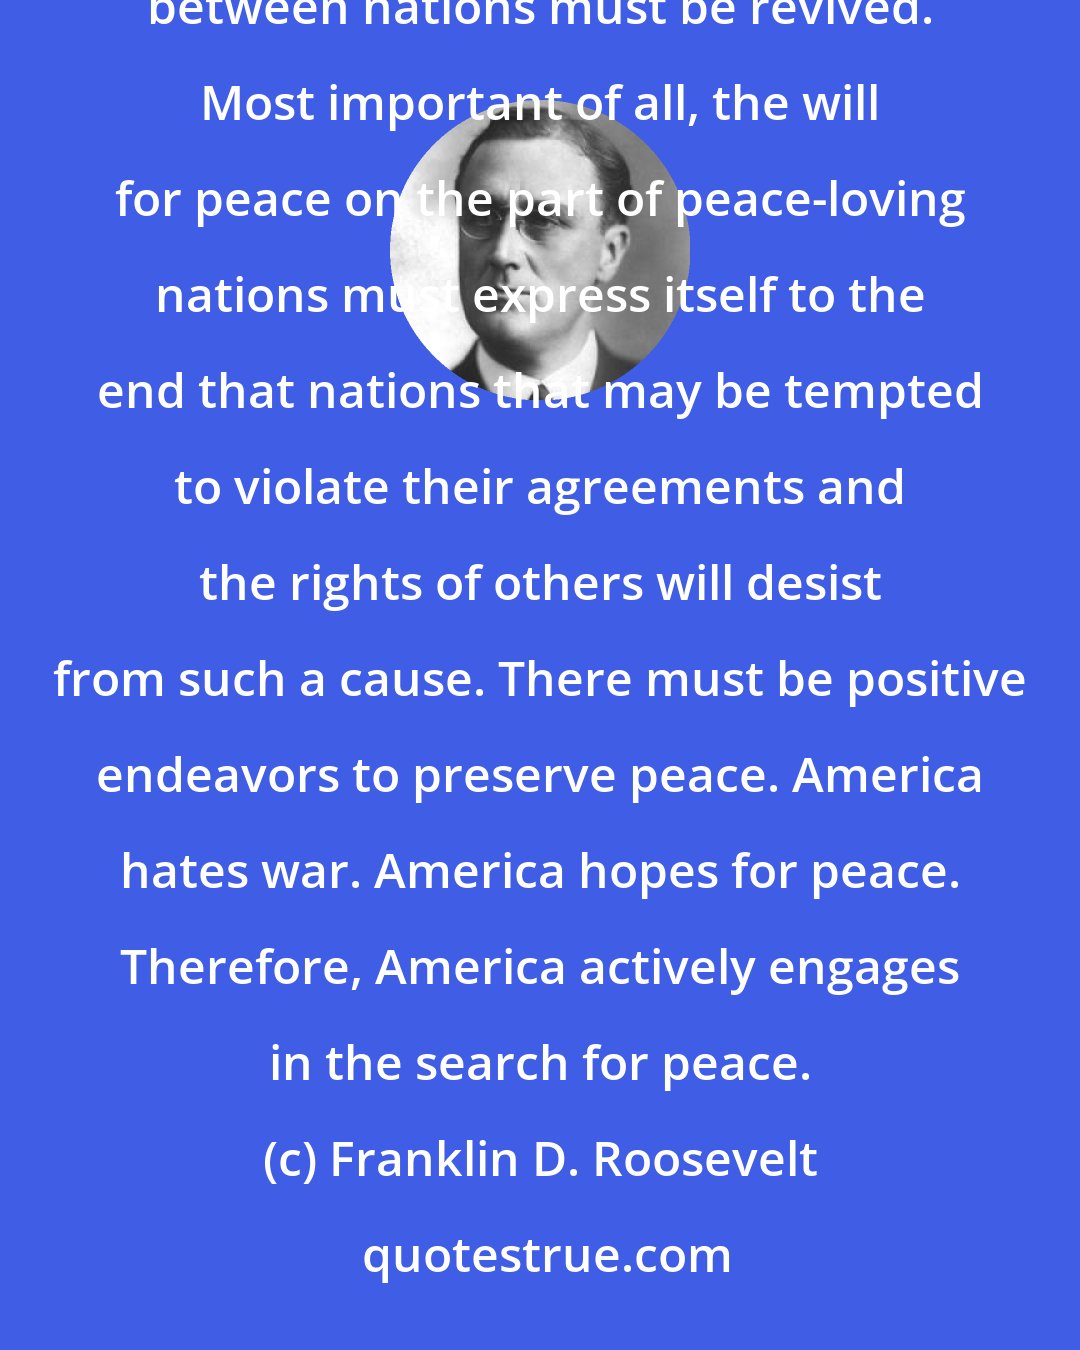 Franklin D. Roosevelt: If civilization is to survive, the principles of the Prince of Peace must be restored. Shattered trust between nations must be revived. Most important of all, the will for peace on the part of peace-loving nations must express itself to the end that nations that may be tempted to violate their agreements and the rights of others will desist from such a cause. There must be positive endeavors to preserve peace. America hates war. America hopes for peace. Therefore, America actively engages in the search for peace.